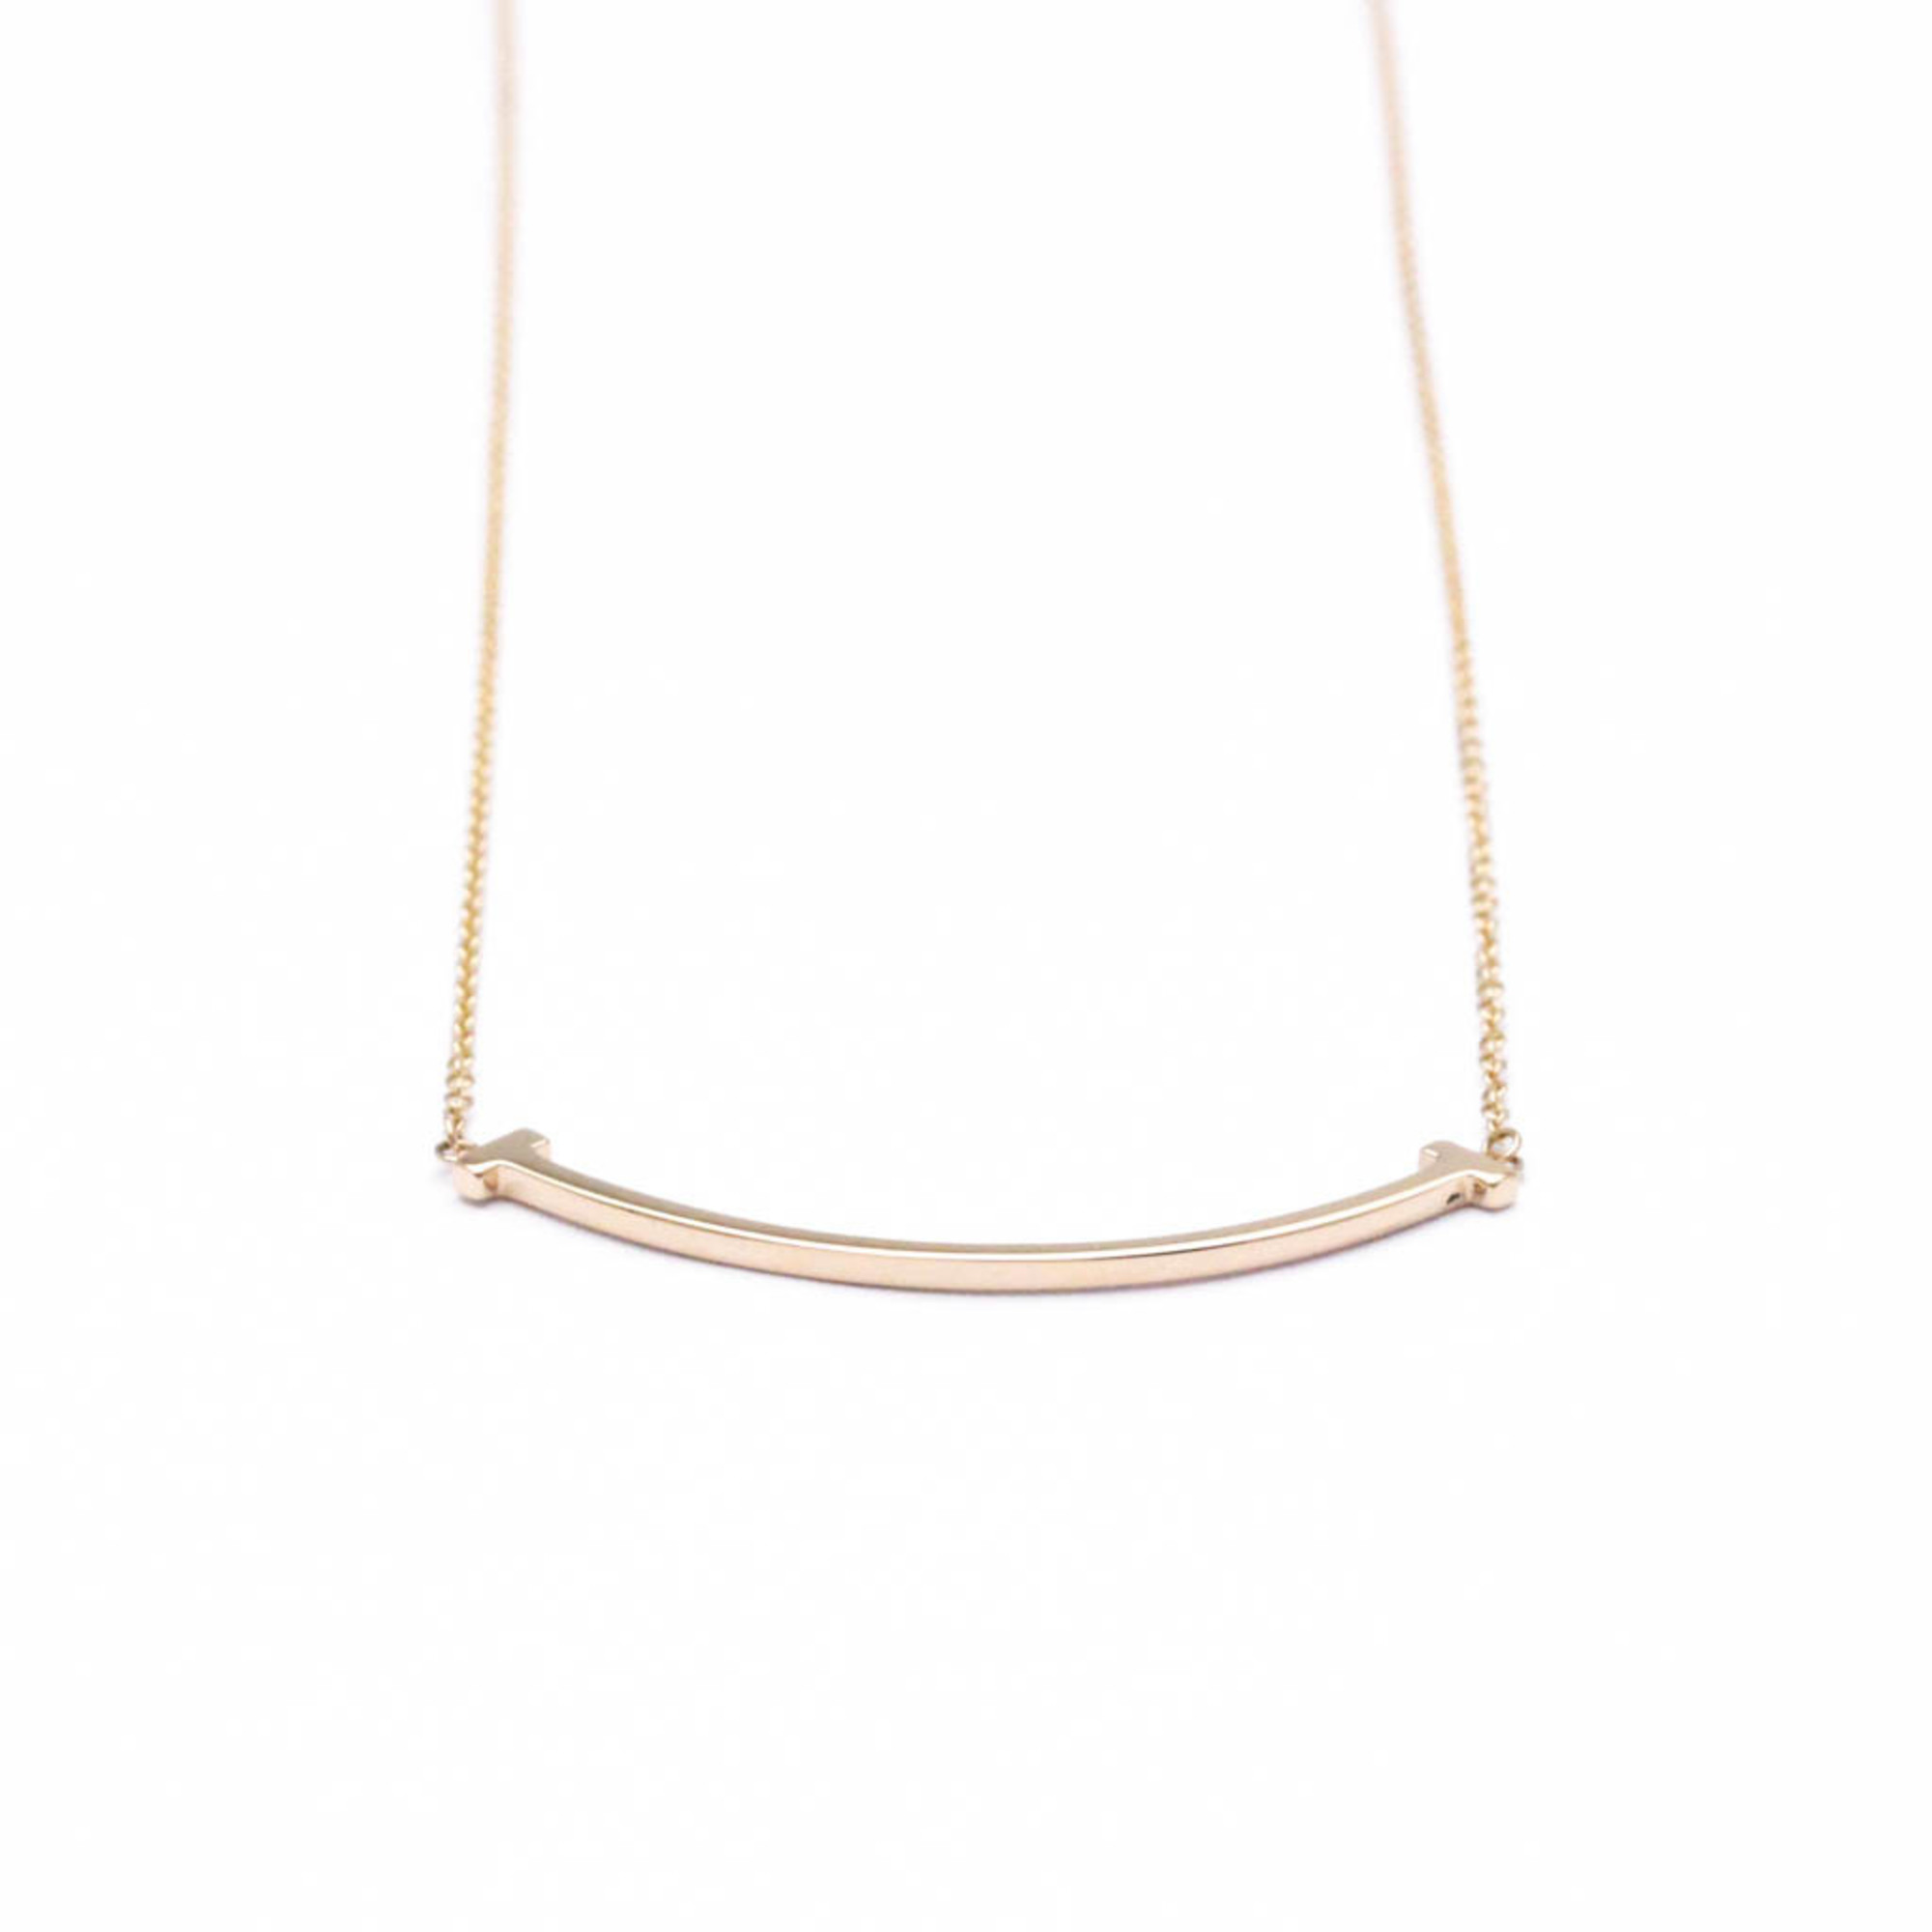 Tiffany Smile Pink Gold (18K) No Stone Women's Fashion Pendant Necklace (Pink Gold)